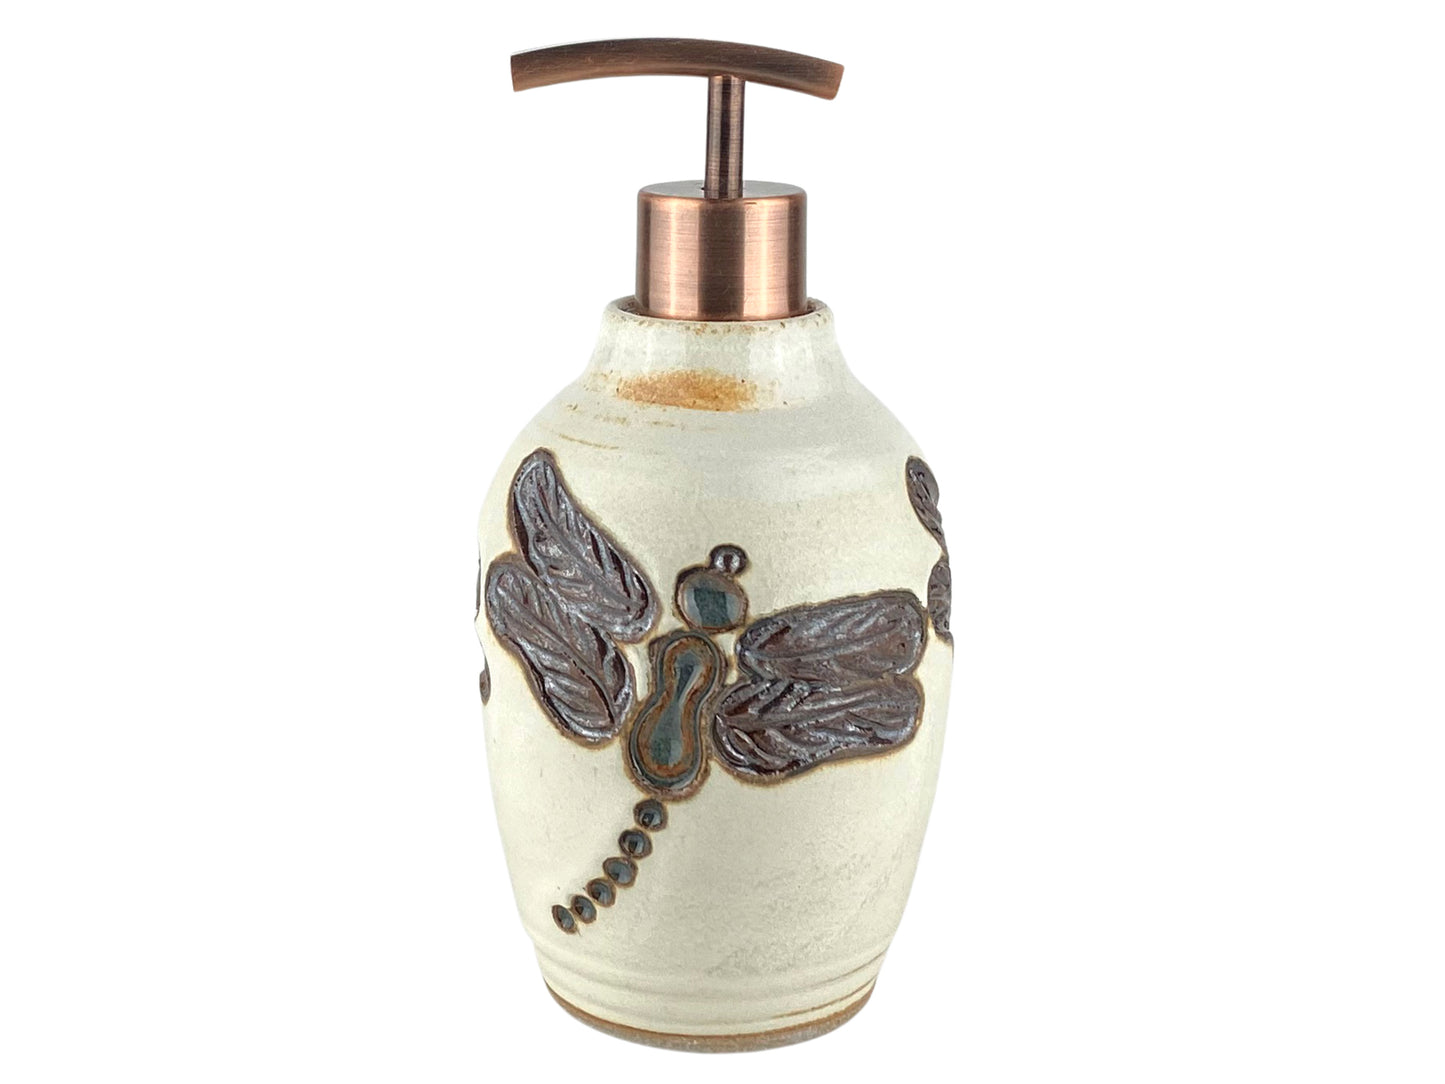 16 oz. Liquid Soap or Lotion Dispenser with Dragonfly Design